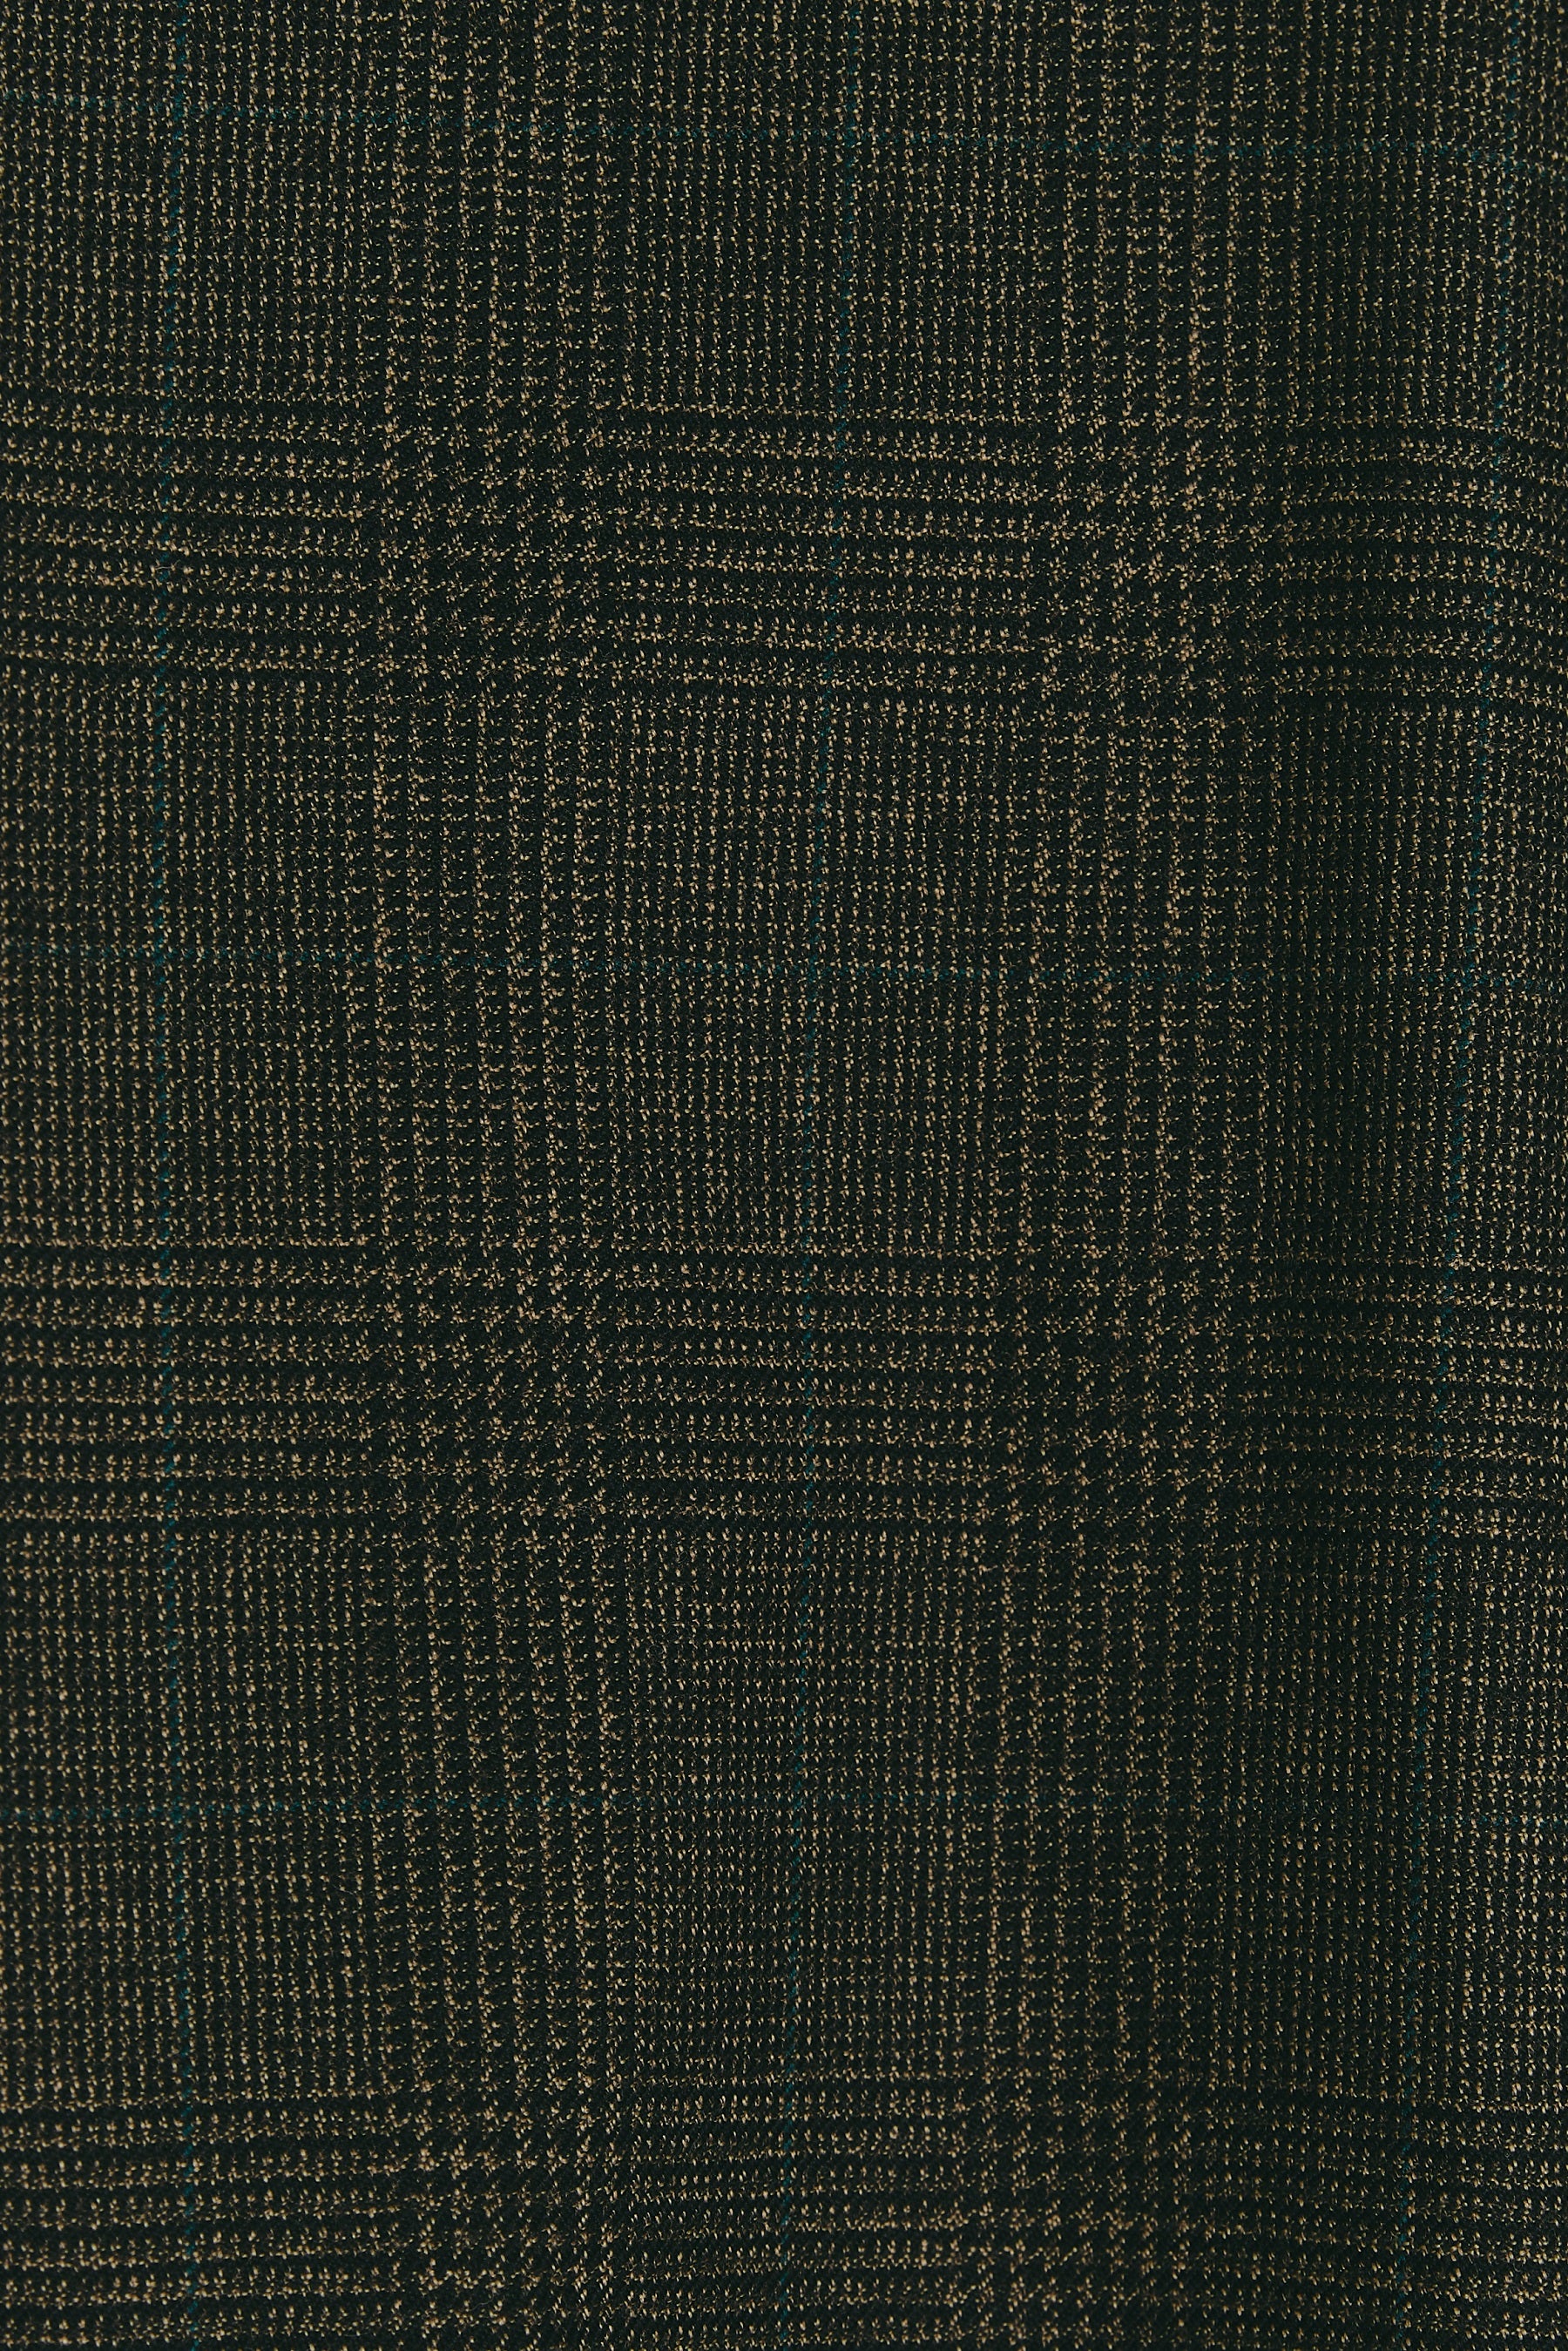 Single-pleated in brown glen check